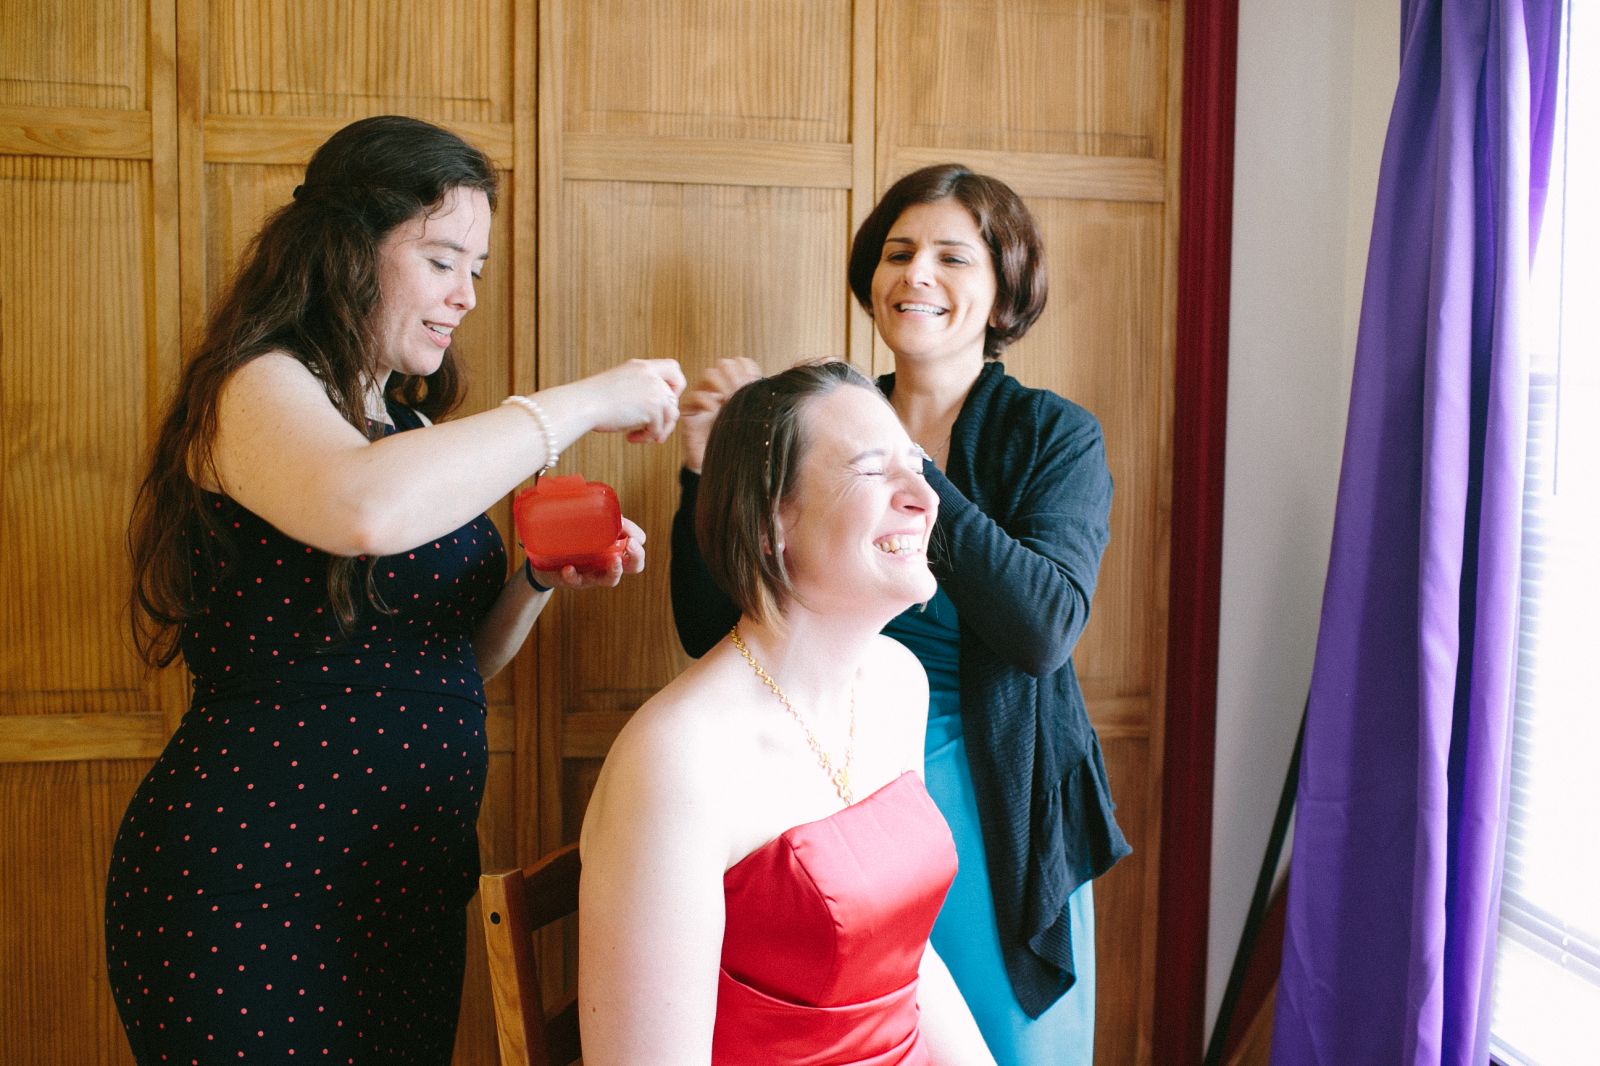 Bride laughing with friends before wedding